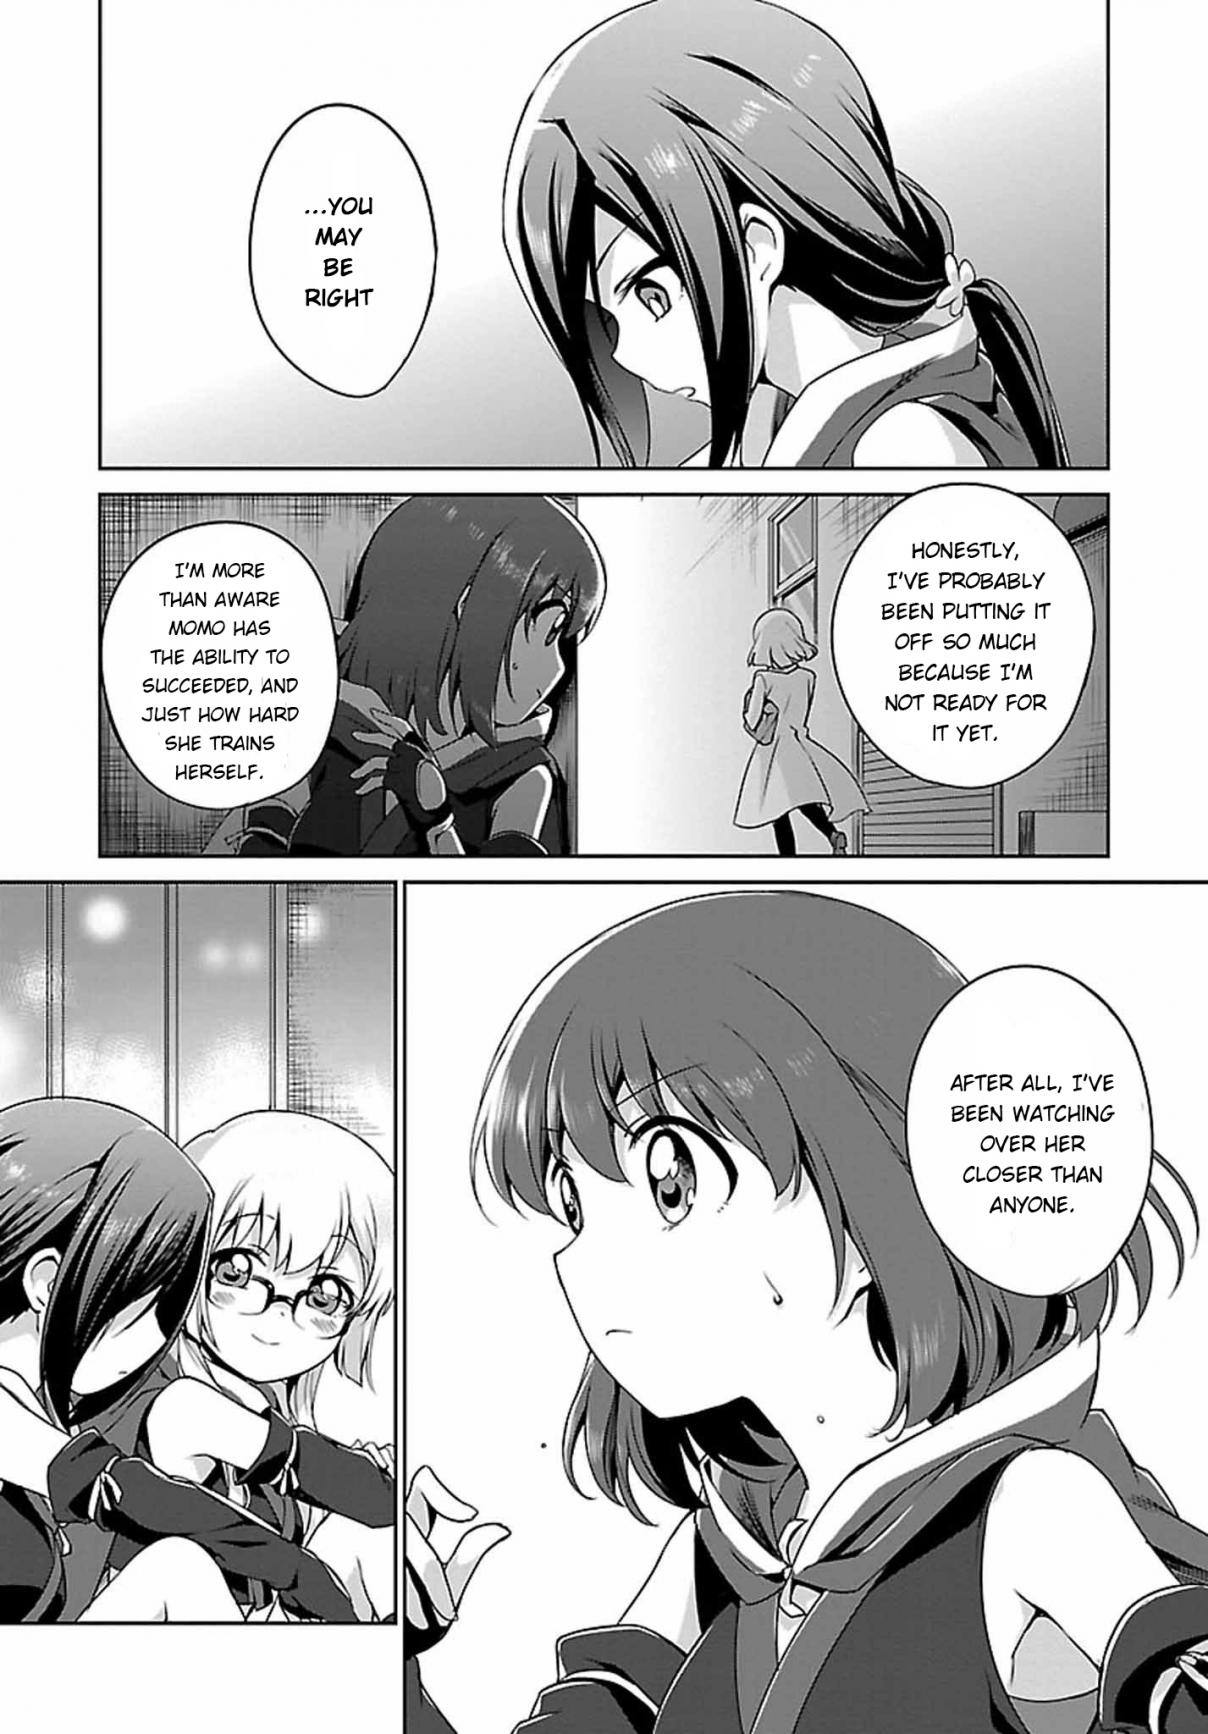 Release the Spyce Secret Mission Vol. 2 Ch. 7 Volume 2, Chapter 7